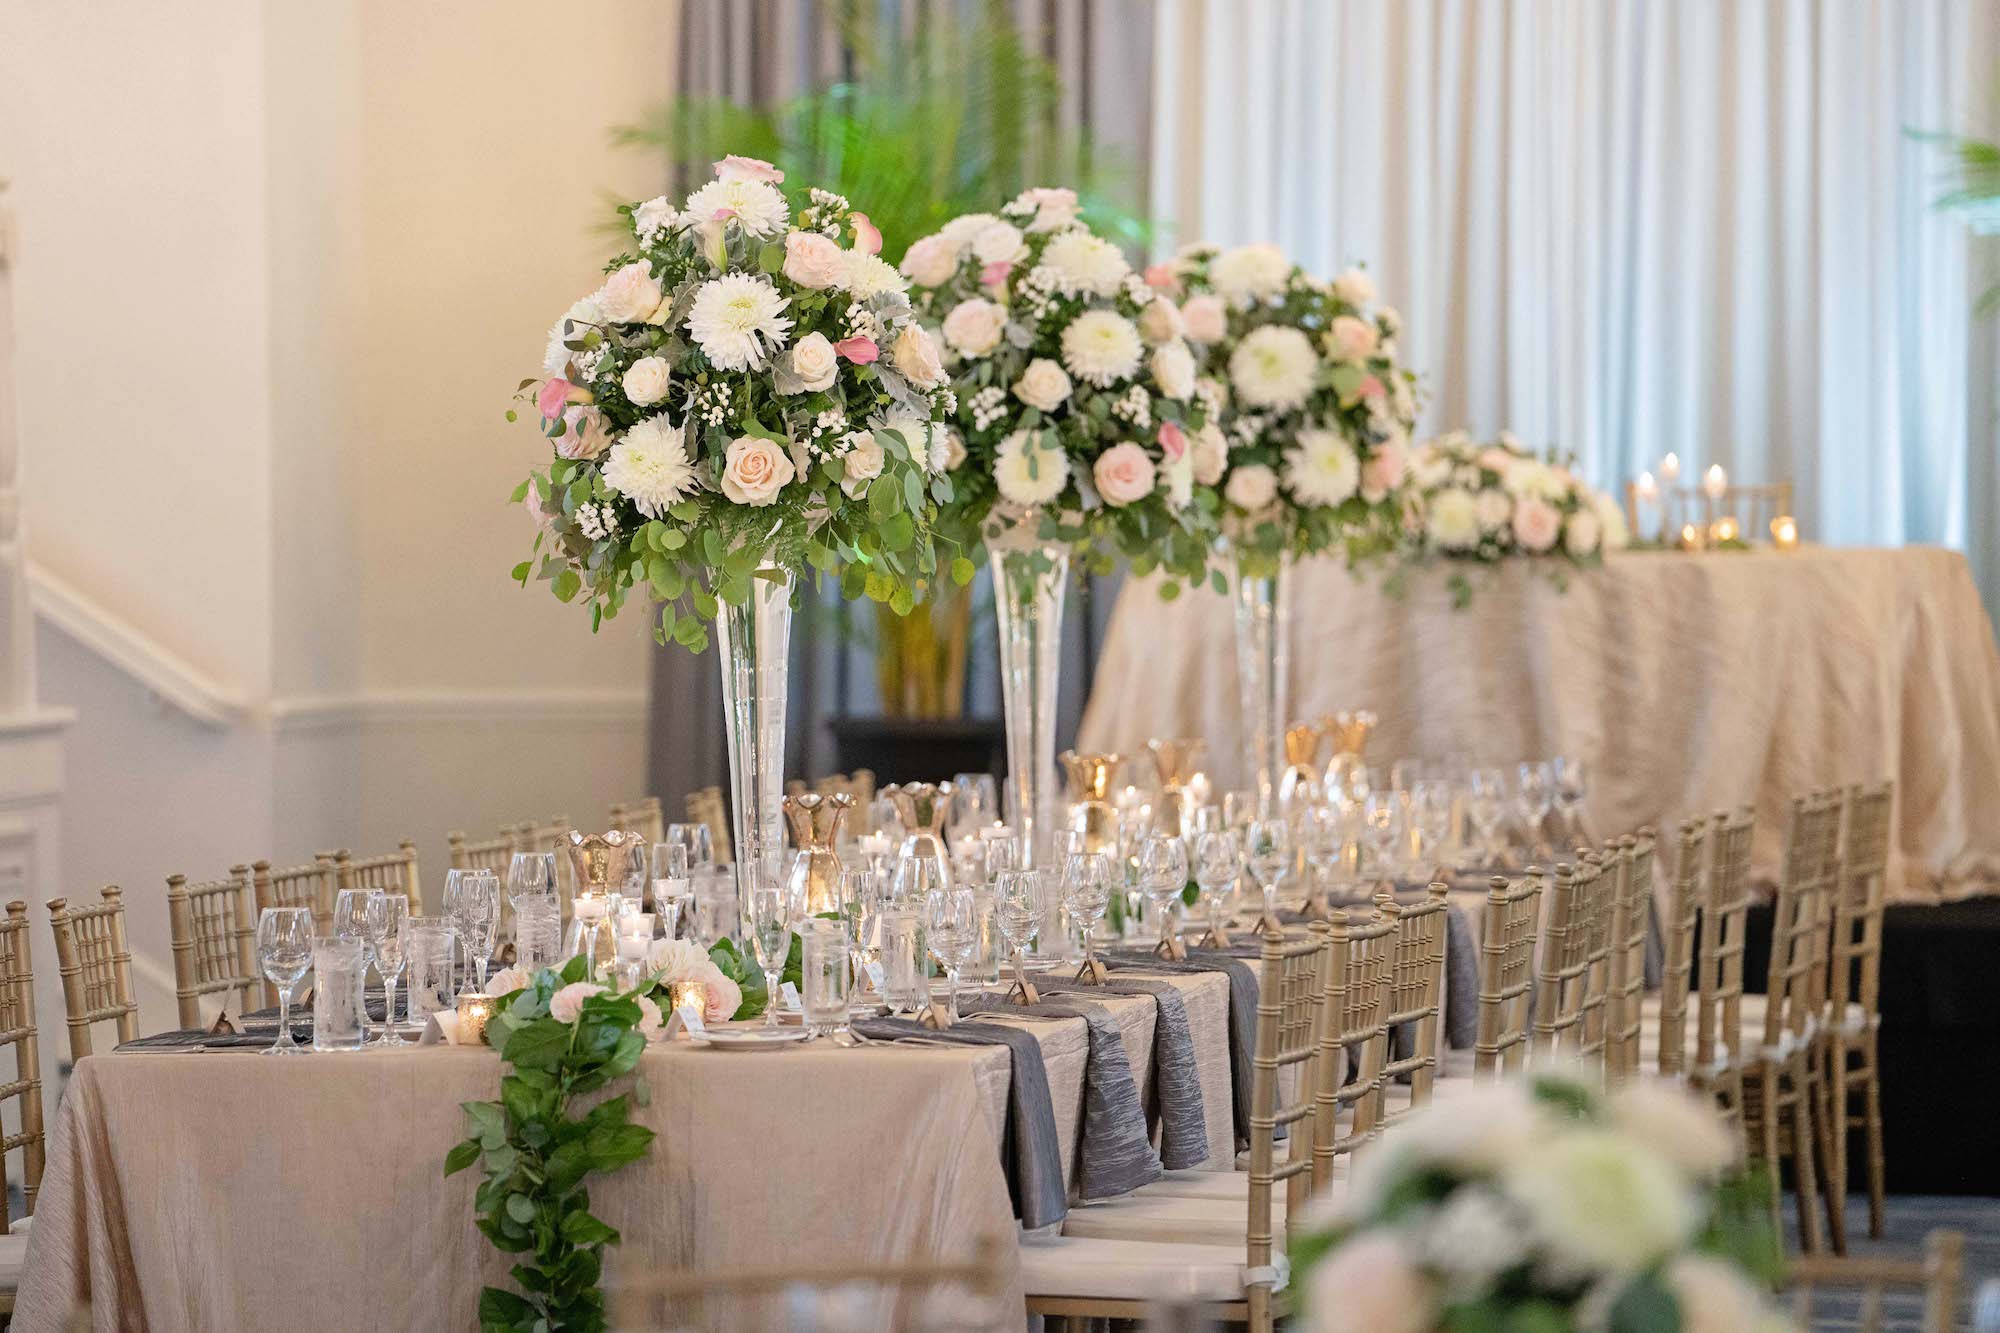 Elegant Summer Wedding Reception Decor in Ballroom, Gold Chiavari Chairs with Wedding Party Head Table, with Silver and Gold Linens, Palm Leaf Decor, Towering Floral Centerpieces with White and Blush Pink Flowers | Tampa Bay Historic Wedding Venue The Don CeSar on St. Pete Beach